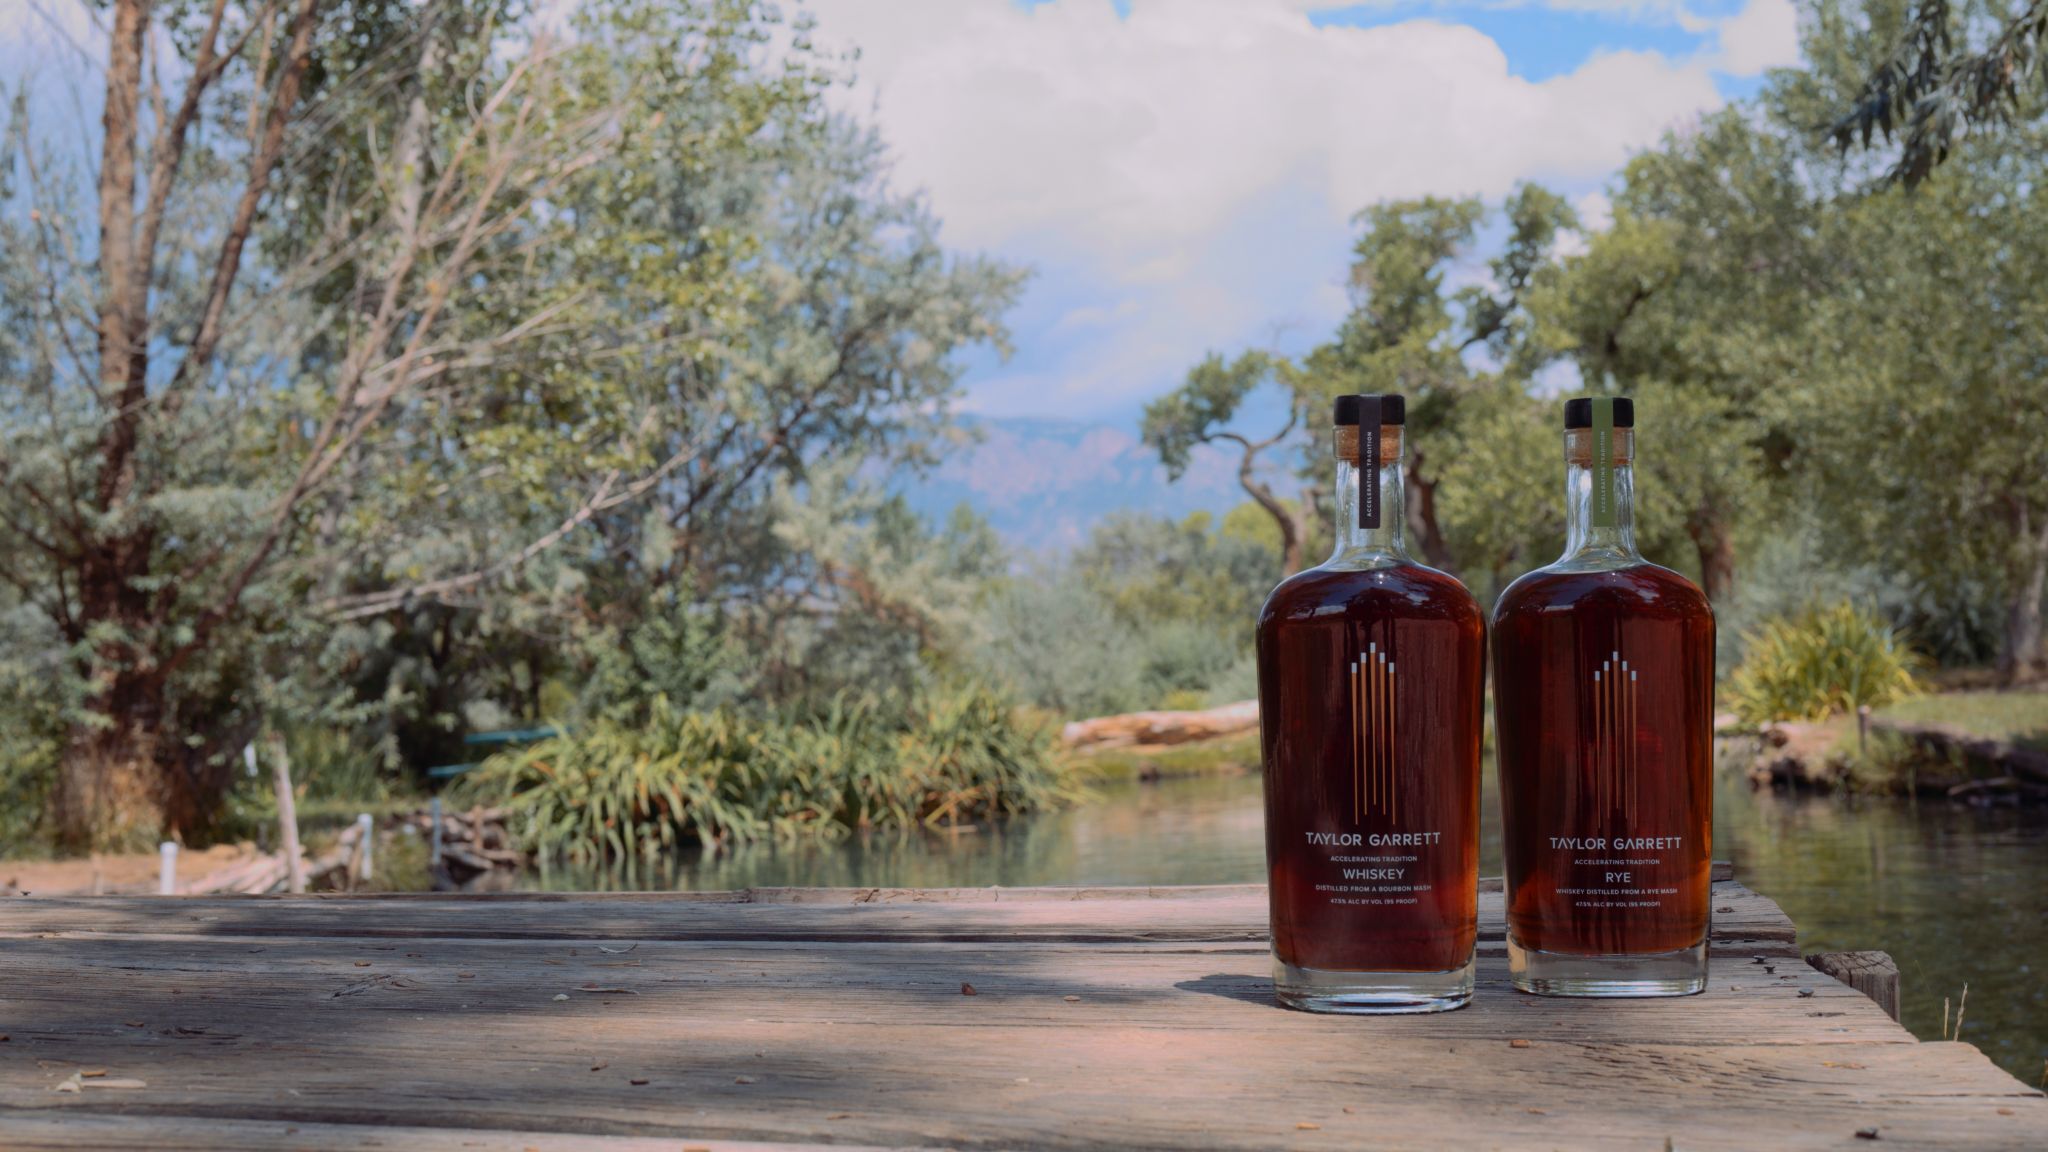 IU C&I Studios Portfolio Taylor Garrett Spirits Two bottles of whiskey on display on a picnic table by a river in the forest